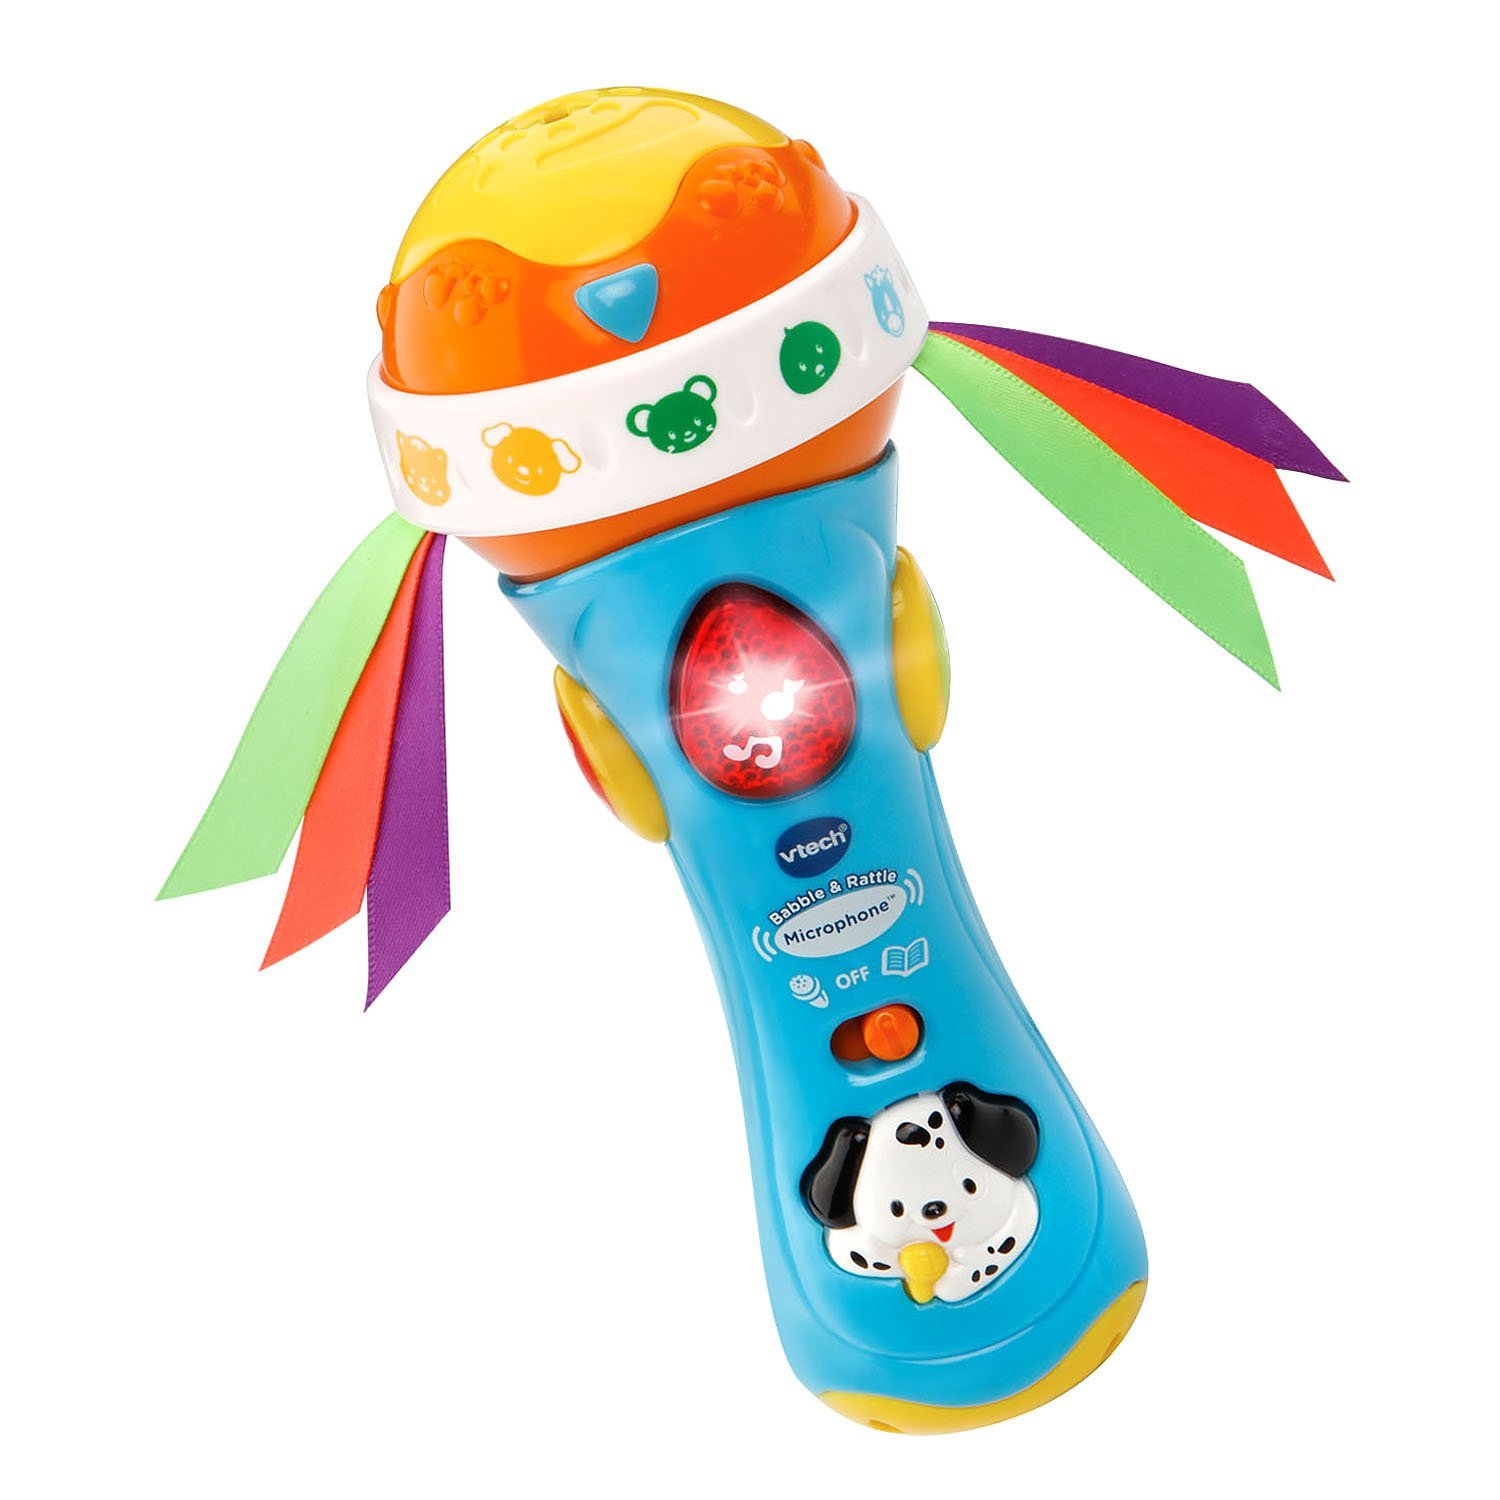 VTech Baby Babble and Rattle Microphone, Blue - $29.09